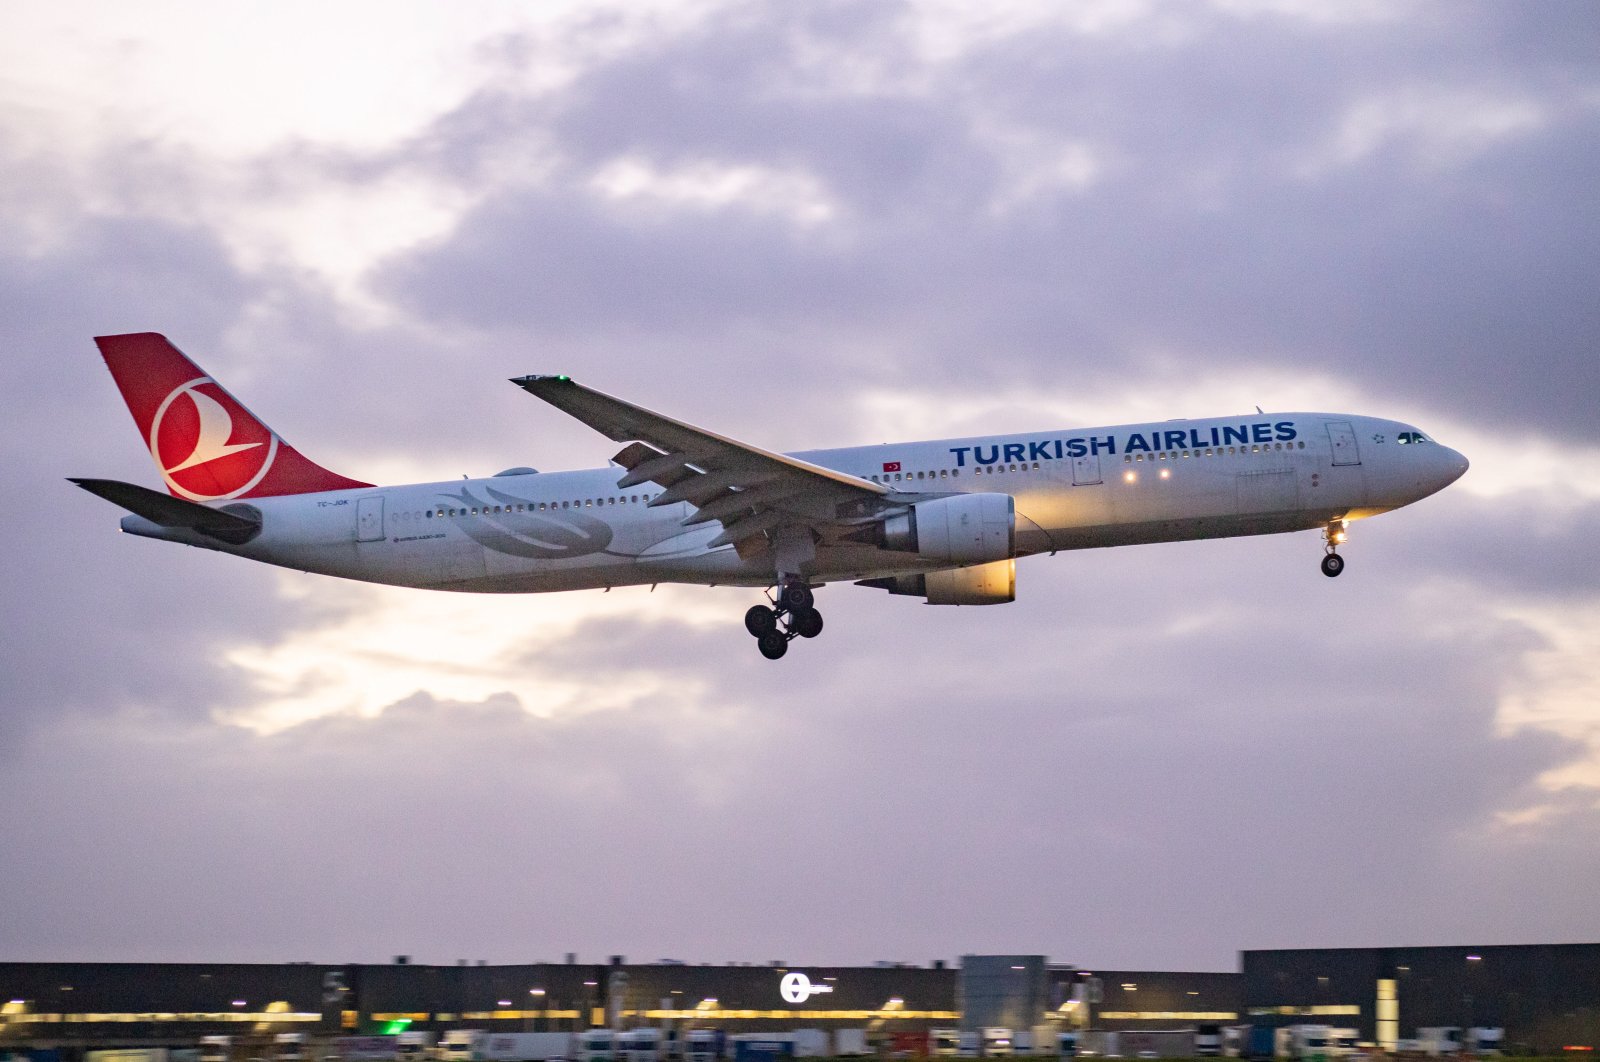 A Turkish Airlines Airbus A330 wide-body aircraft lands at Amsterdam Schiphol Airport, the Netherlands, Jan. 5, 2022. (Reuters Photo)